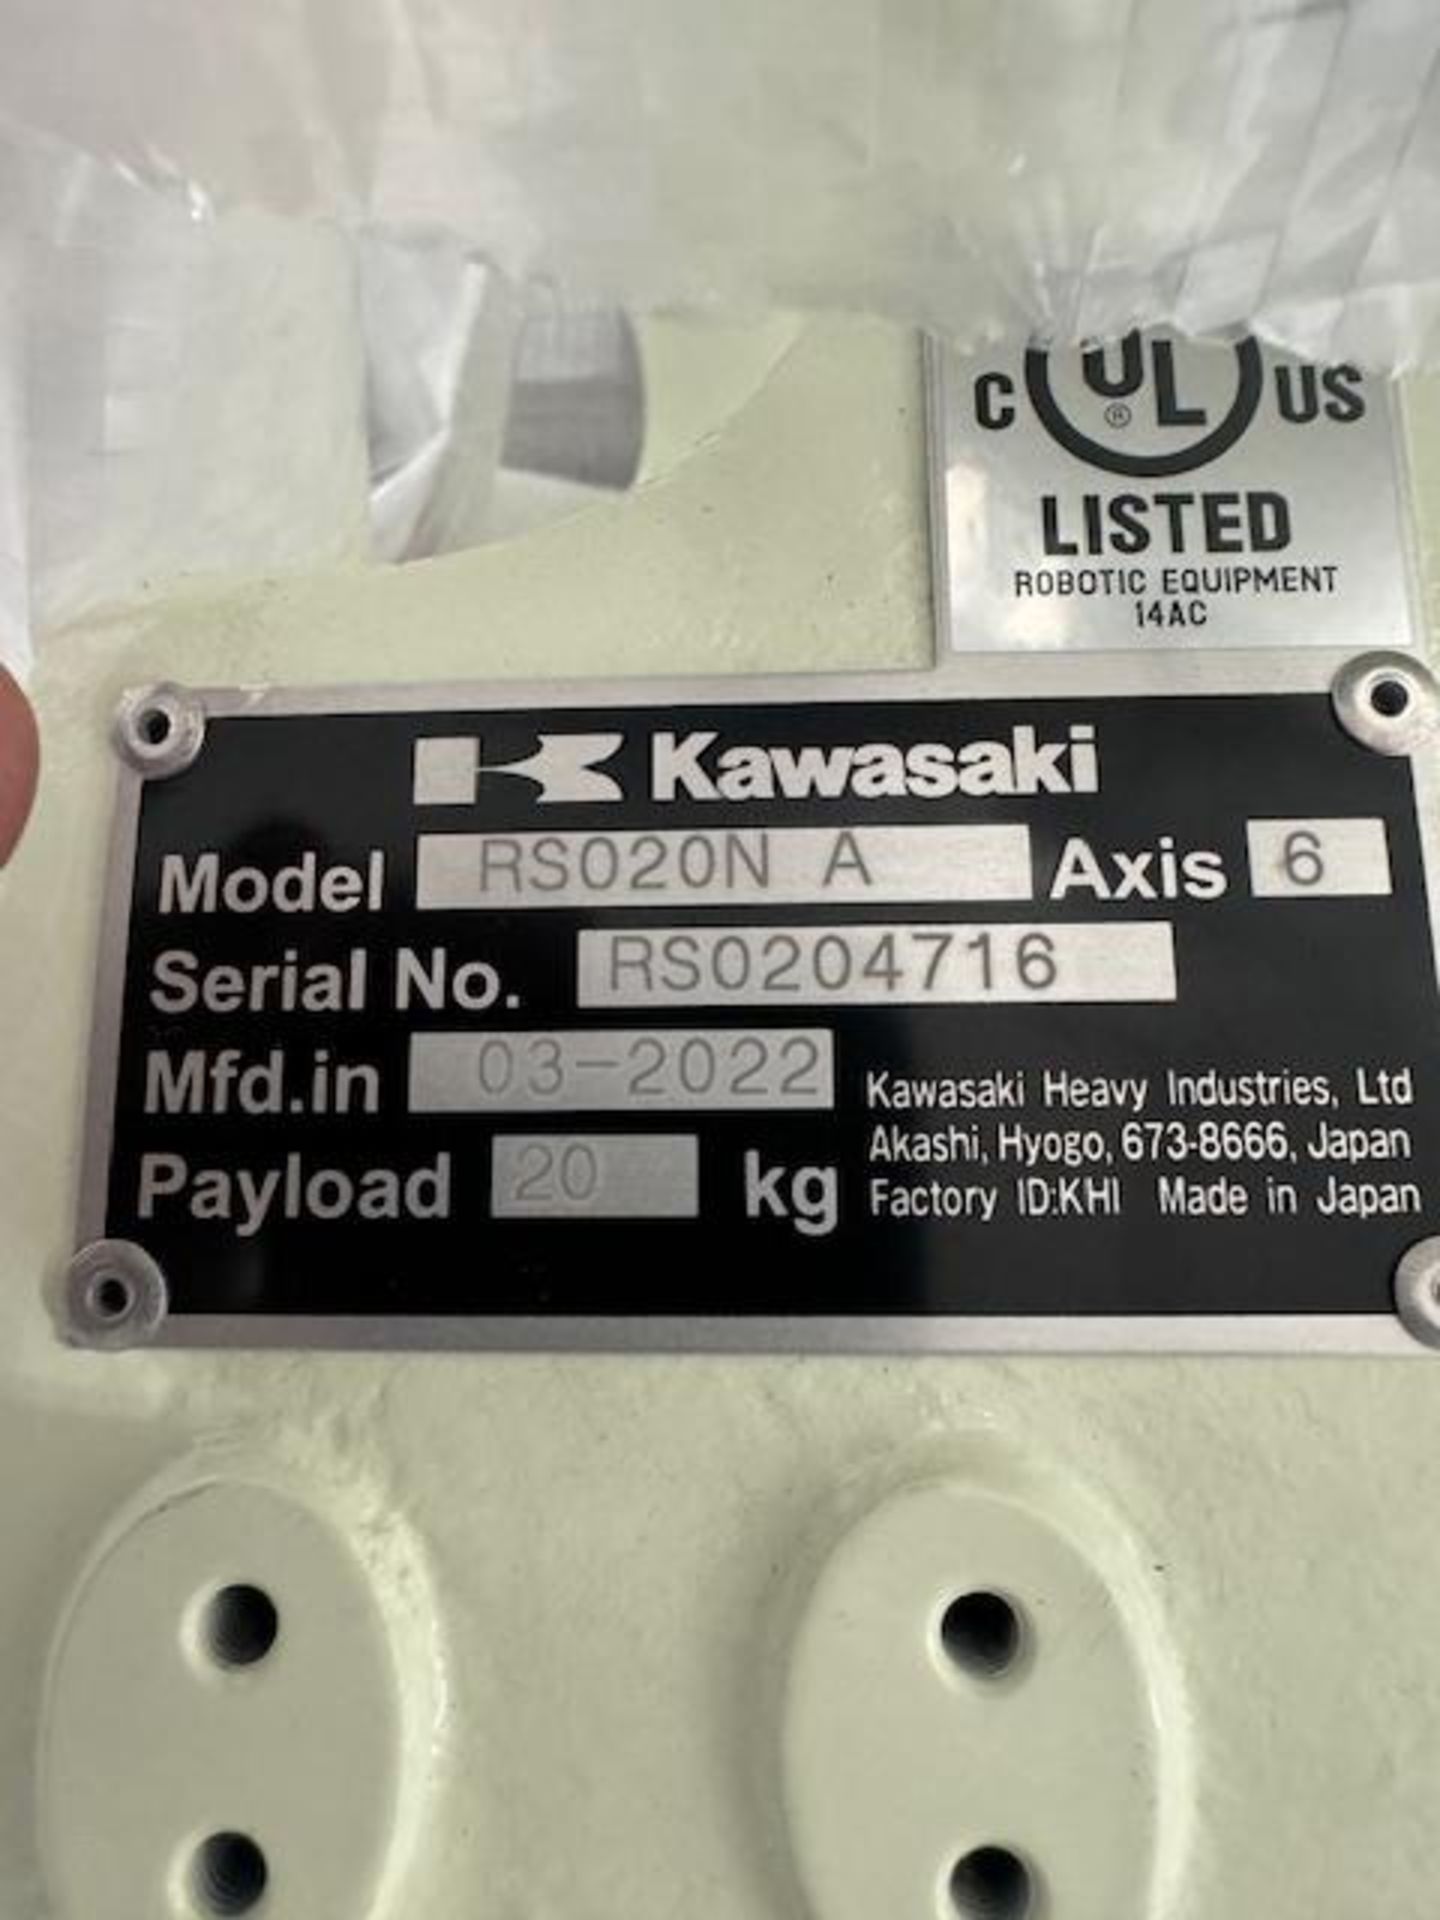 NEW KAWASAKI ROBOT MODEL RS020N, SN 4716, 20KG X 1725MM REACH WITH EO1 CONTROLS, CABLES & TEACH - Image 7 of 7